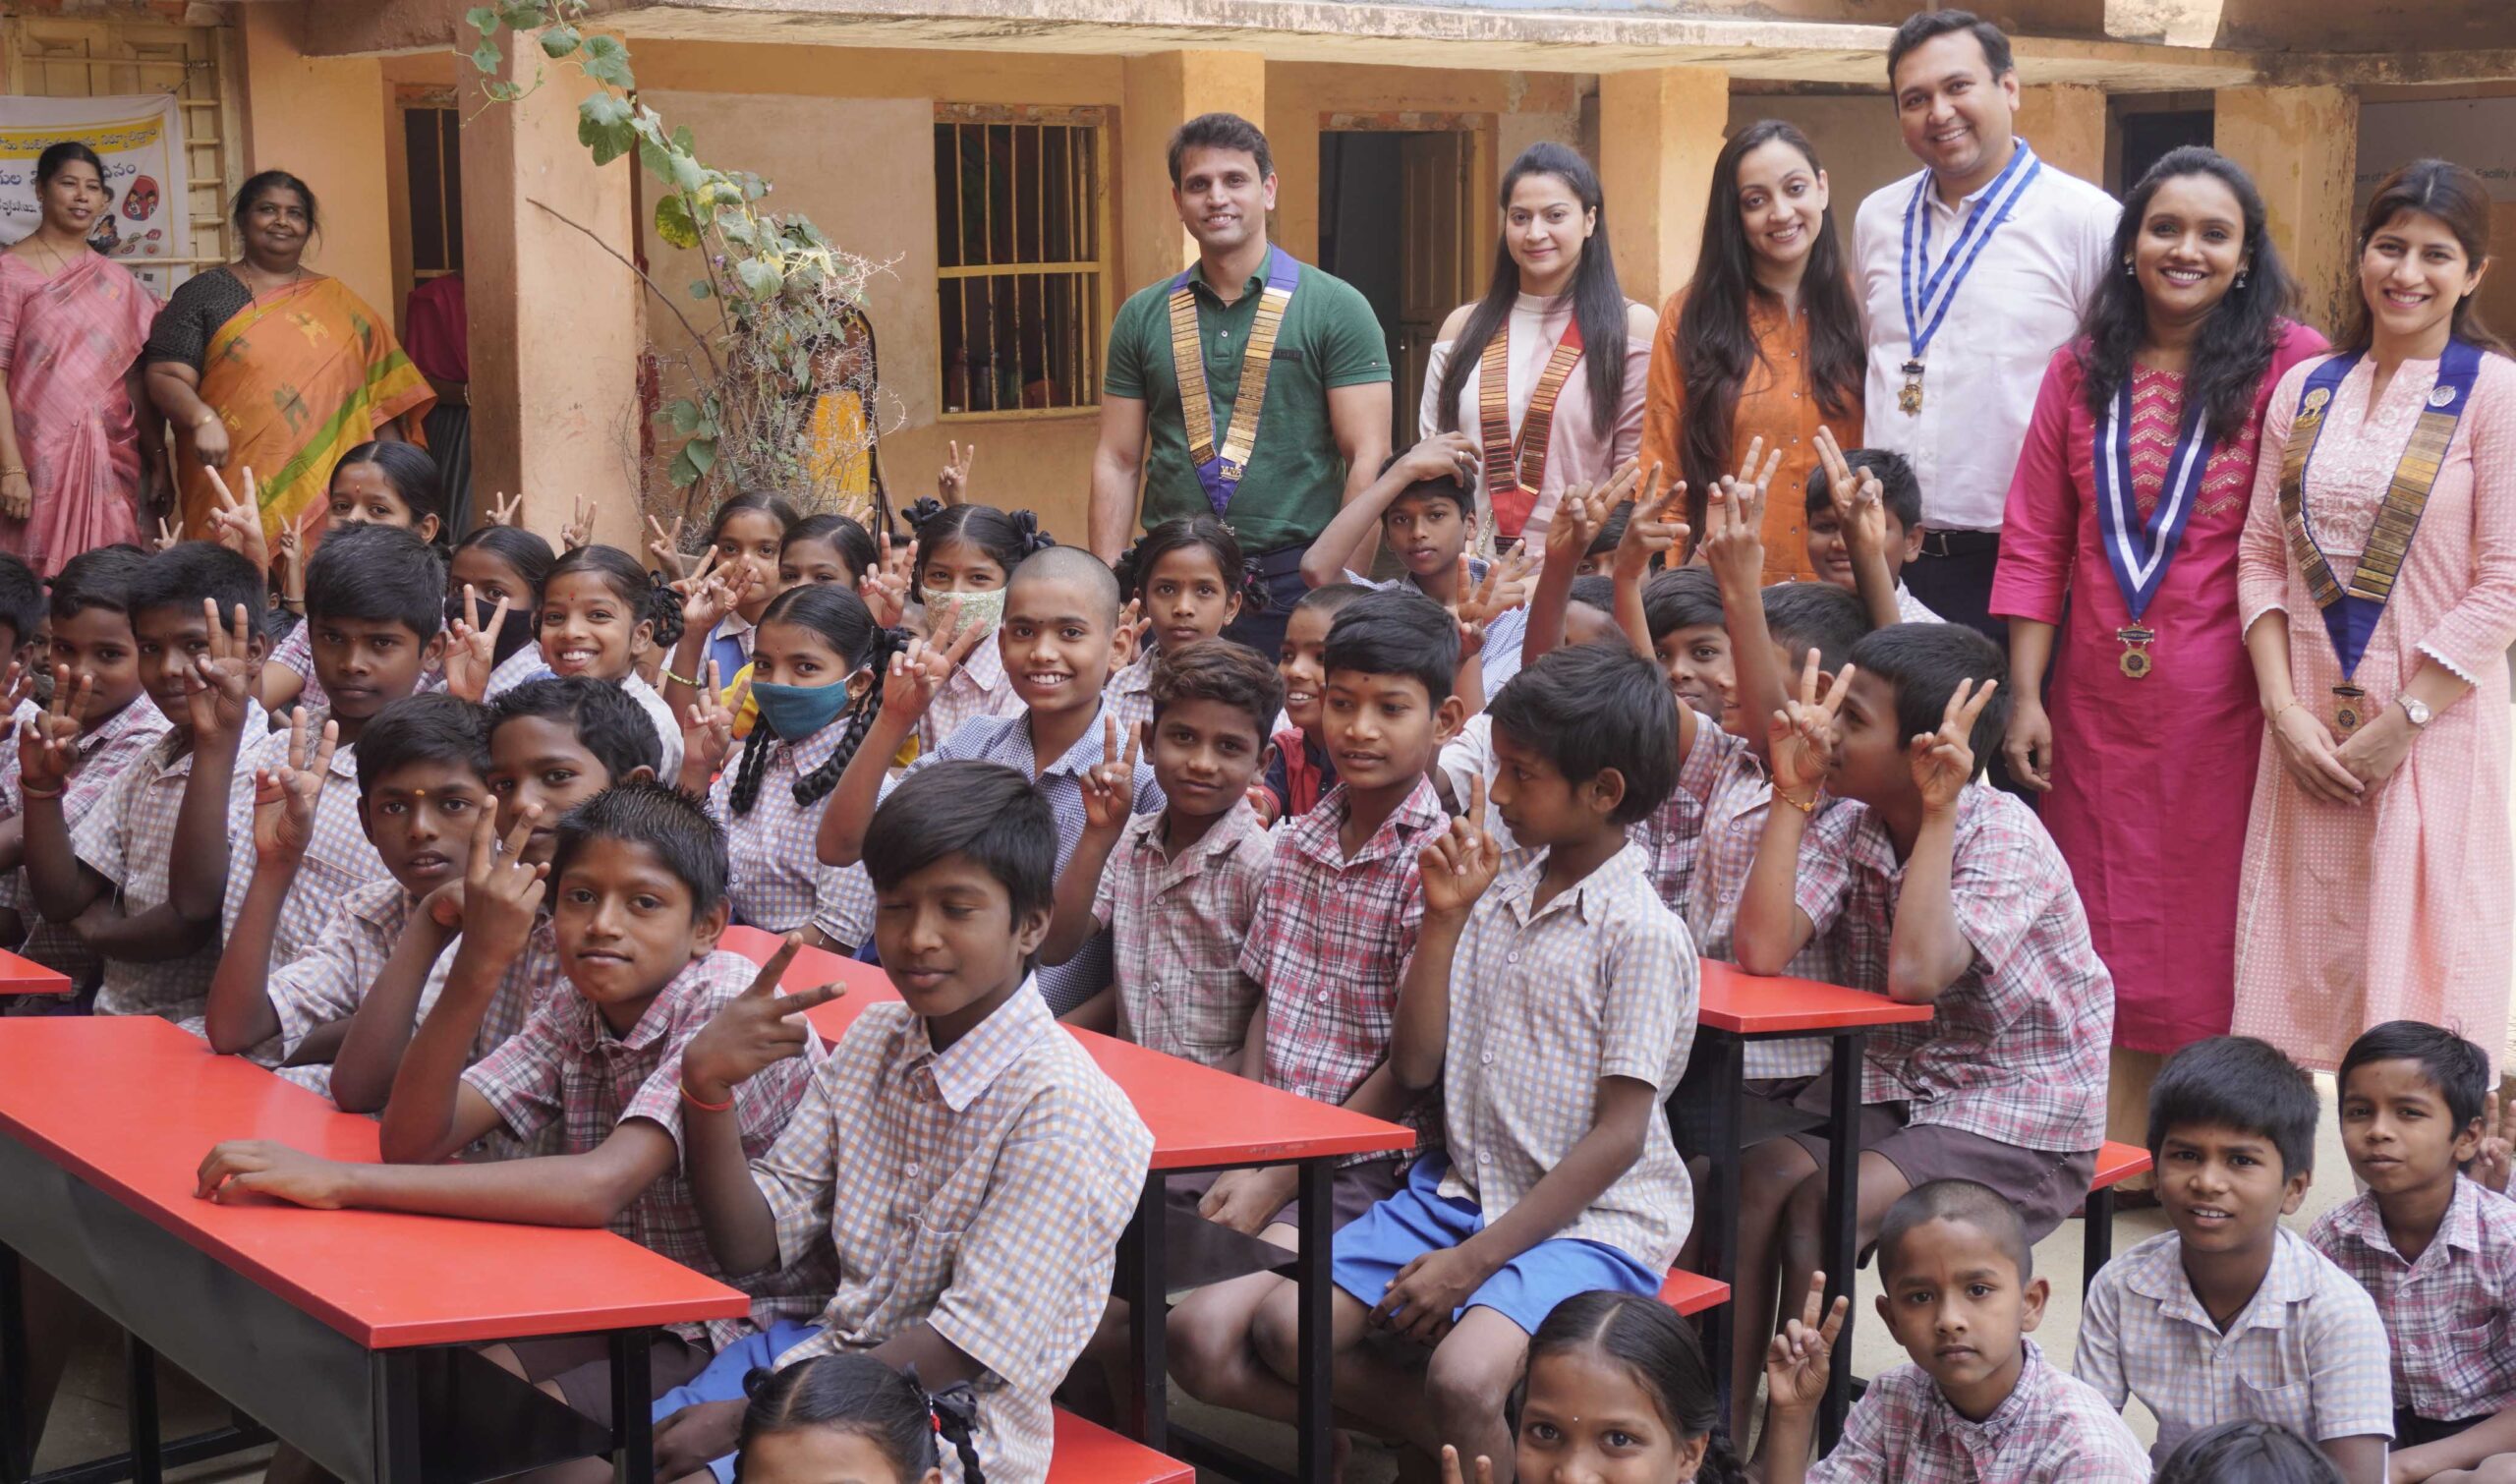 50 Dual Desks donated worth Rs 1.85 lakh to MPPS Govt School at Vattinagulapally. Seen in the pic are Sumanth, Renuka